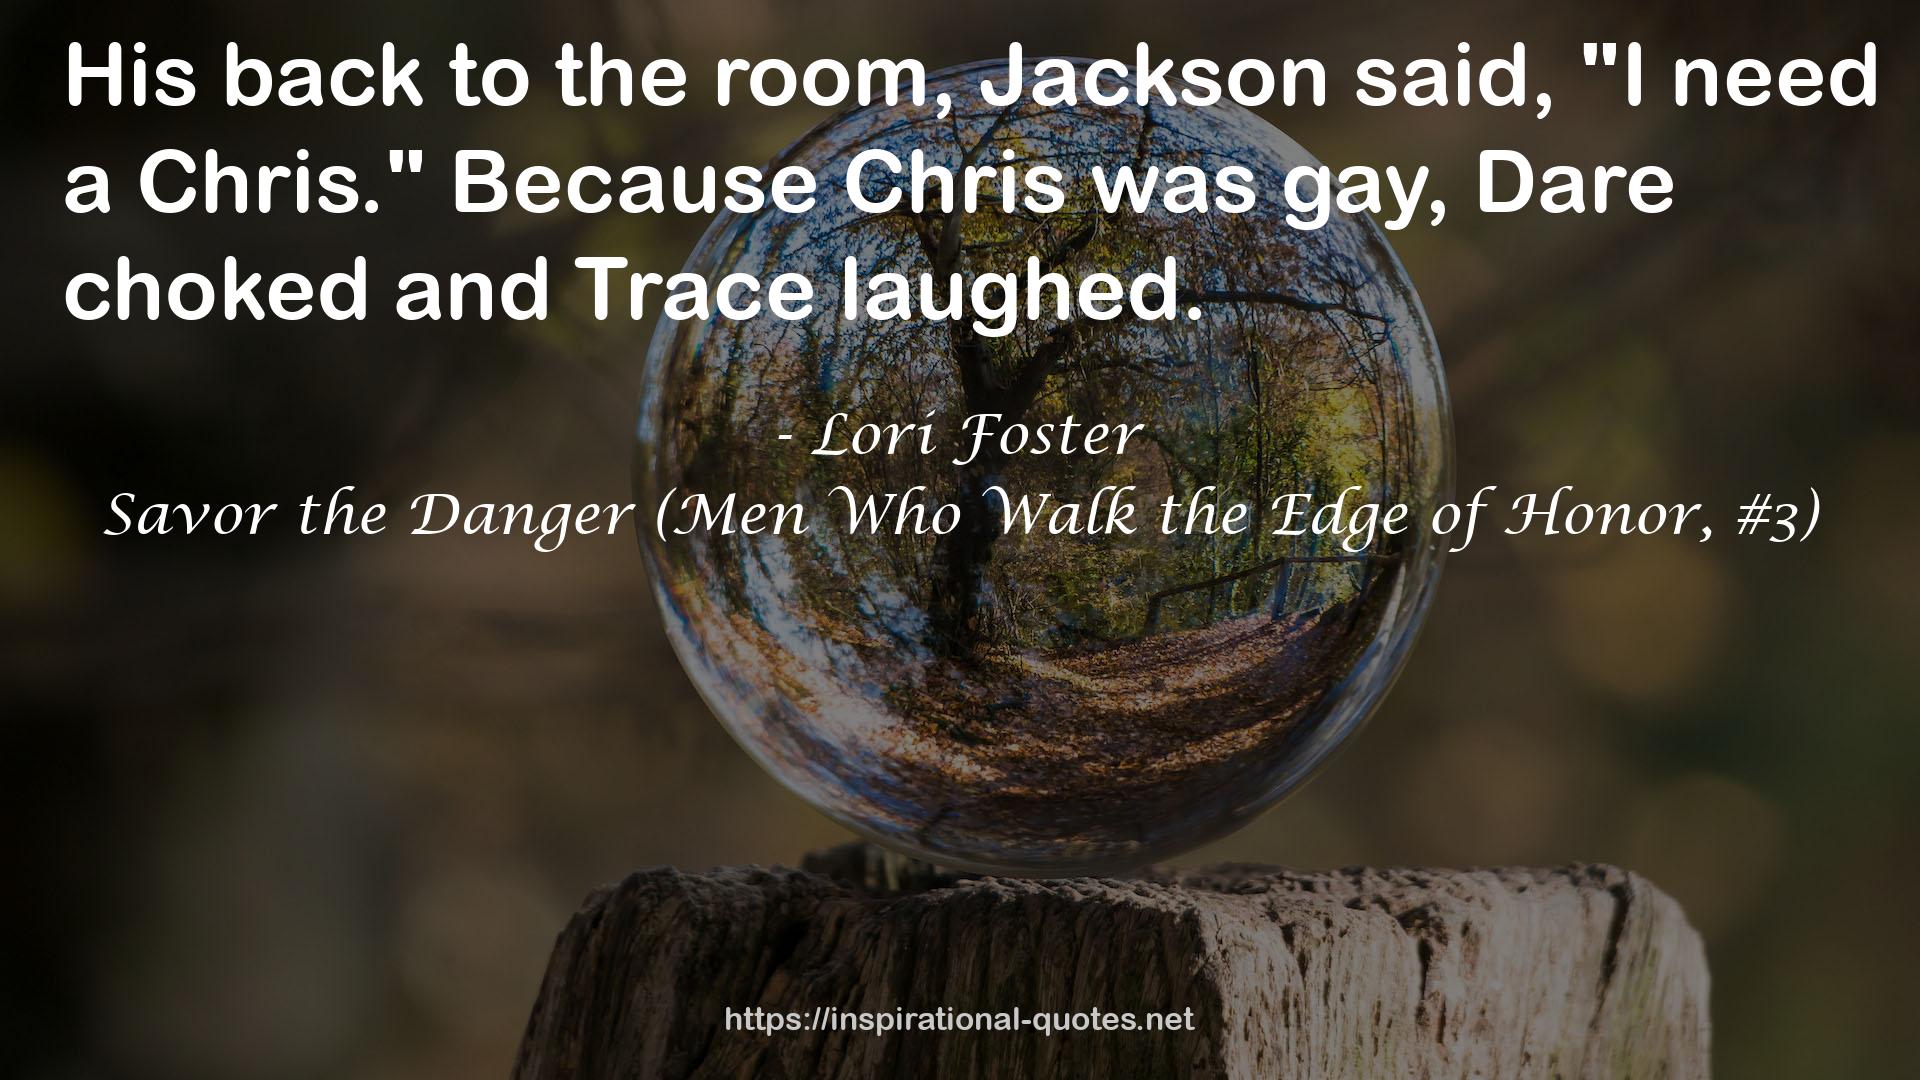 Savor the Danger (Men Who Walk the Edge of Honor, #3) QUOTES